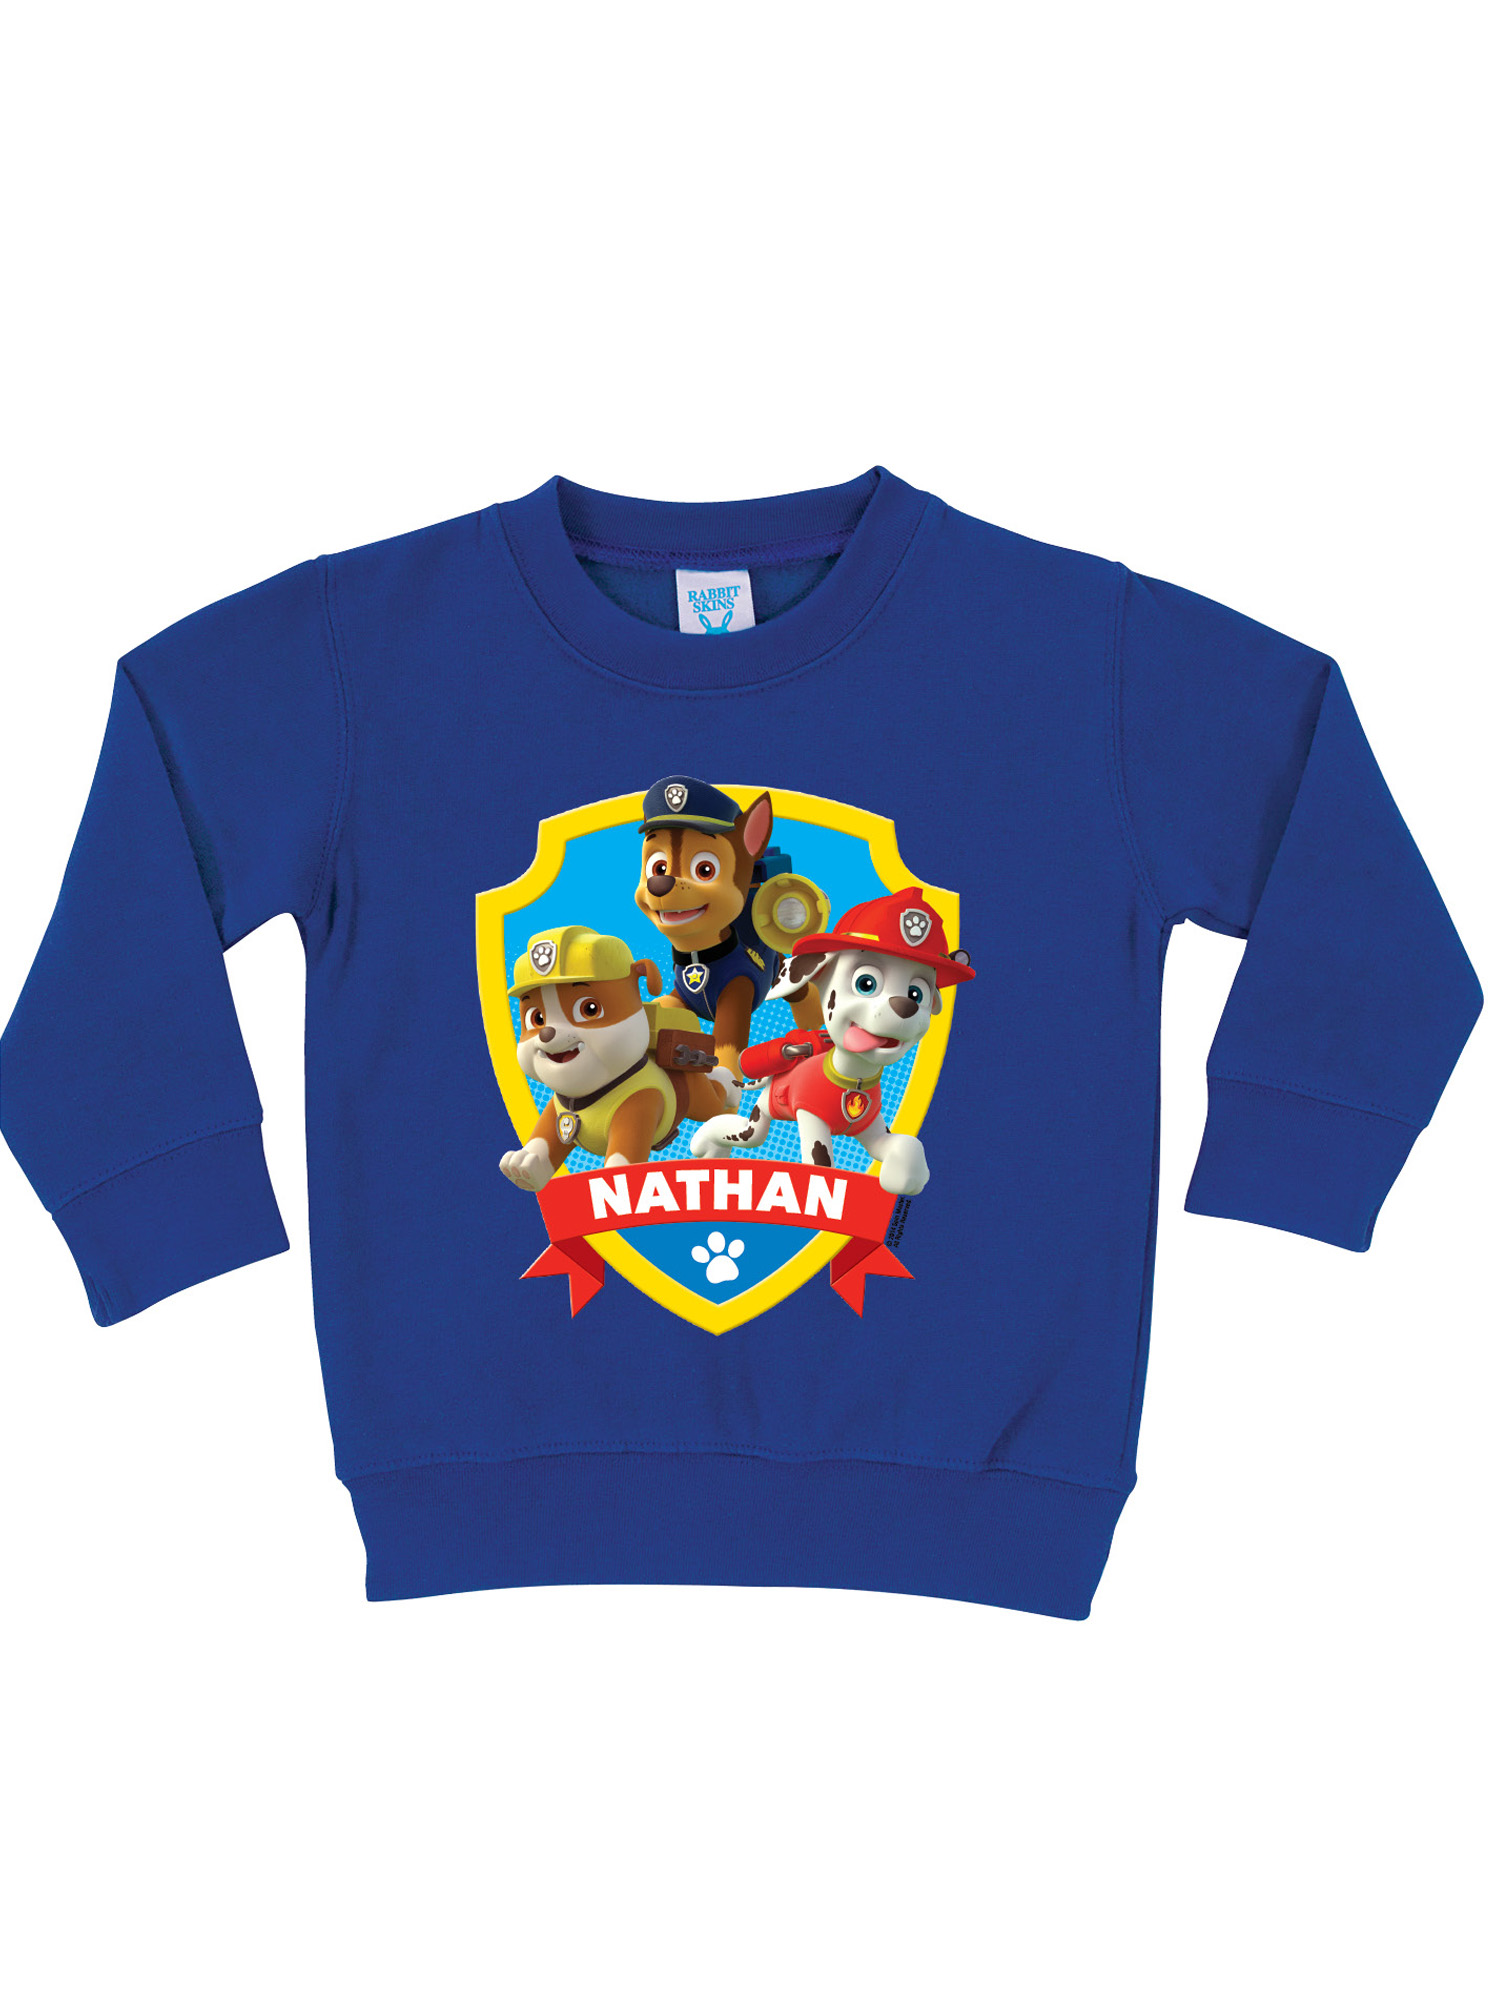 Personalized PAW Patrol Saves the Day Royal Blue Pullover Boys' Sweatshirt - image 1 of 2